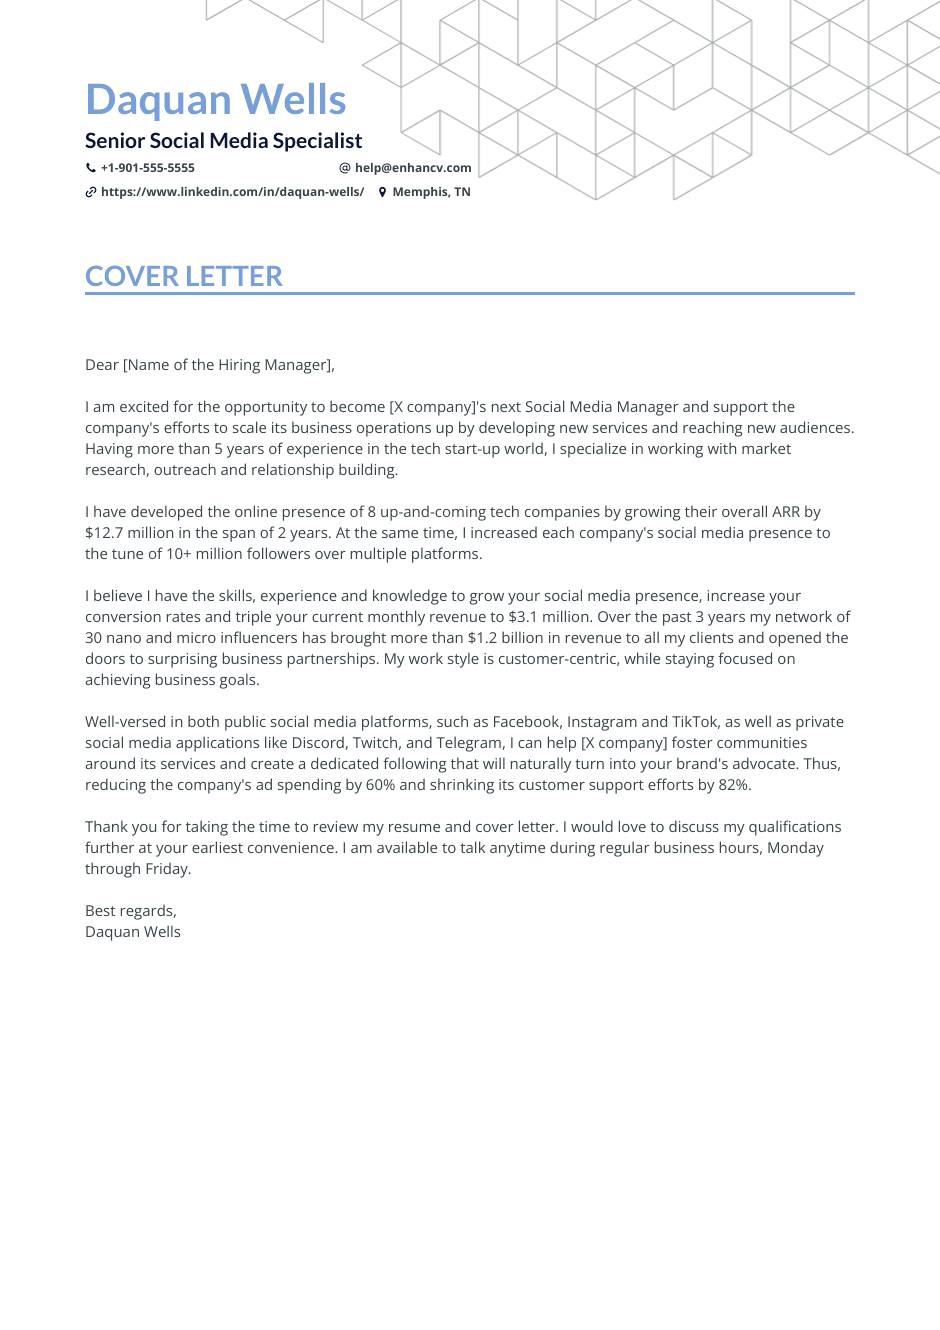 Social media manager cover letter example